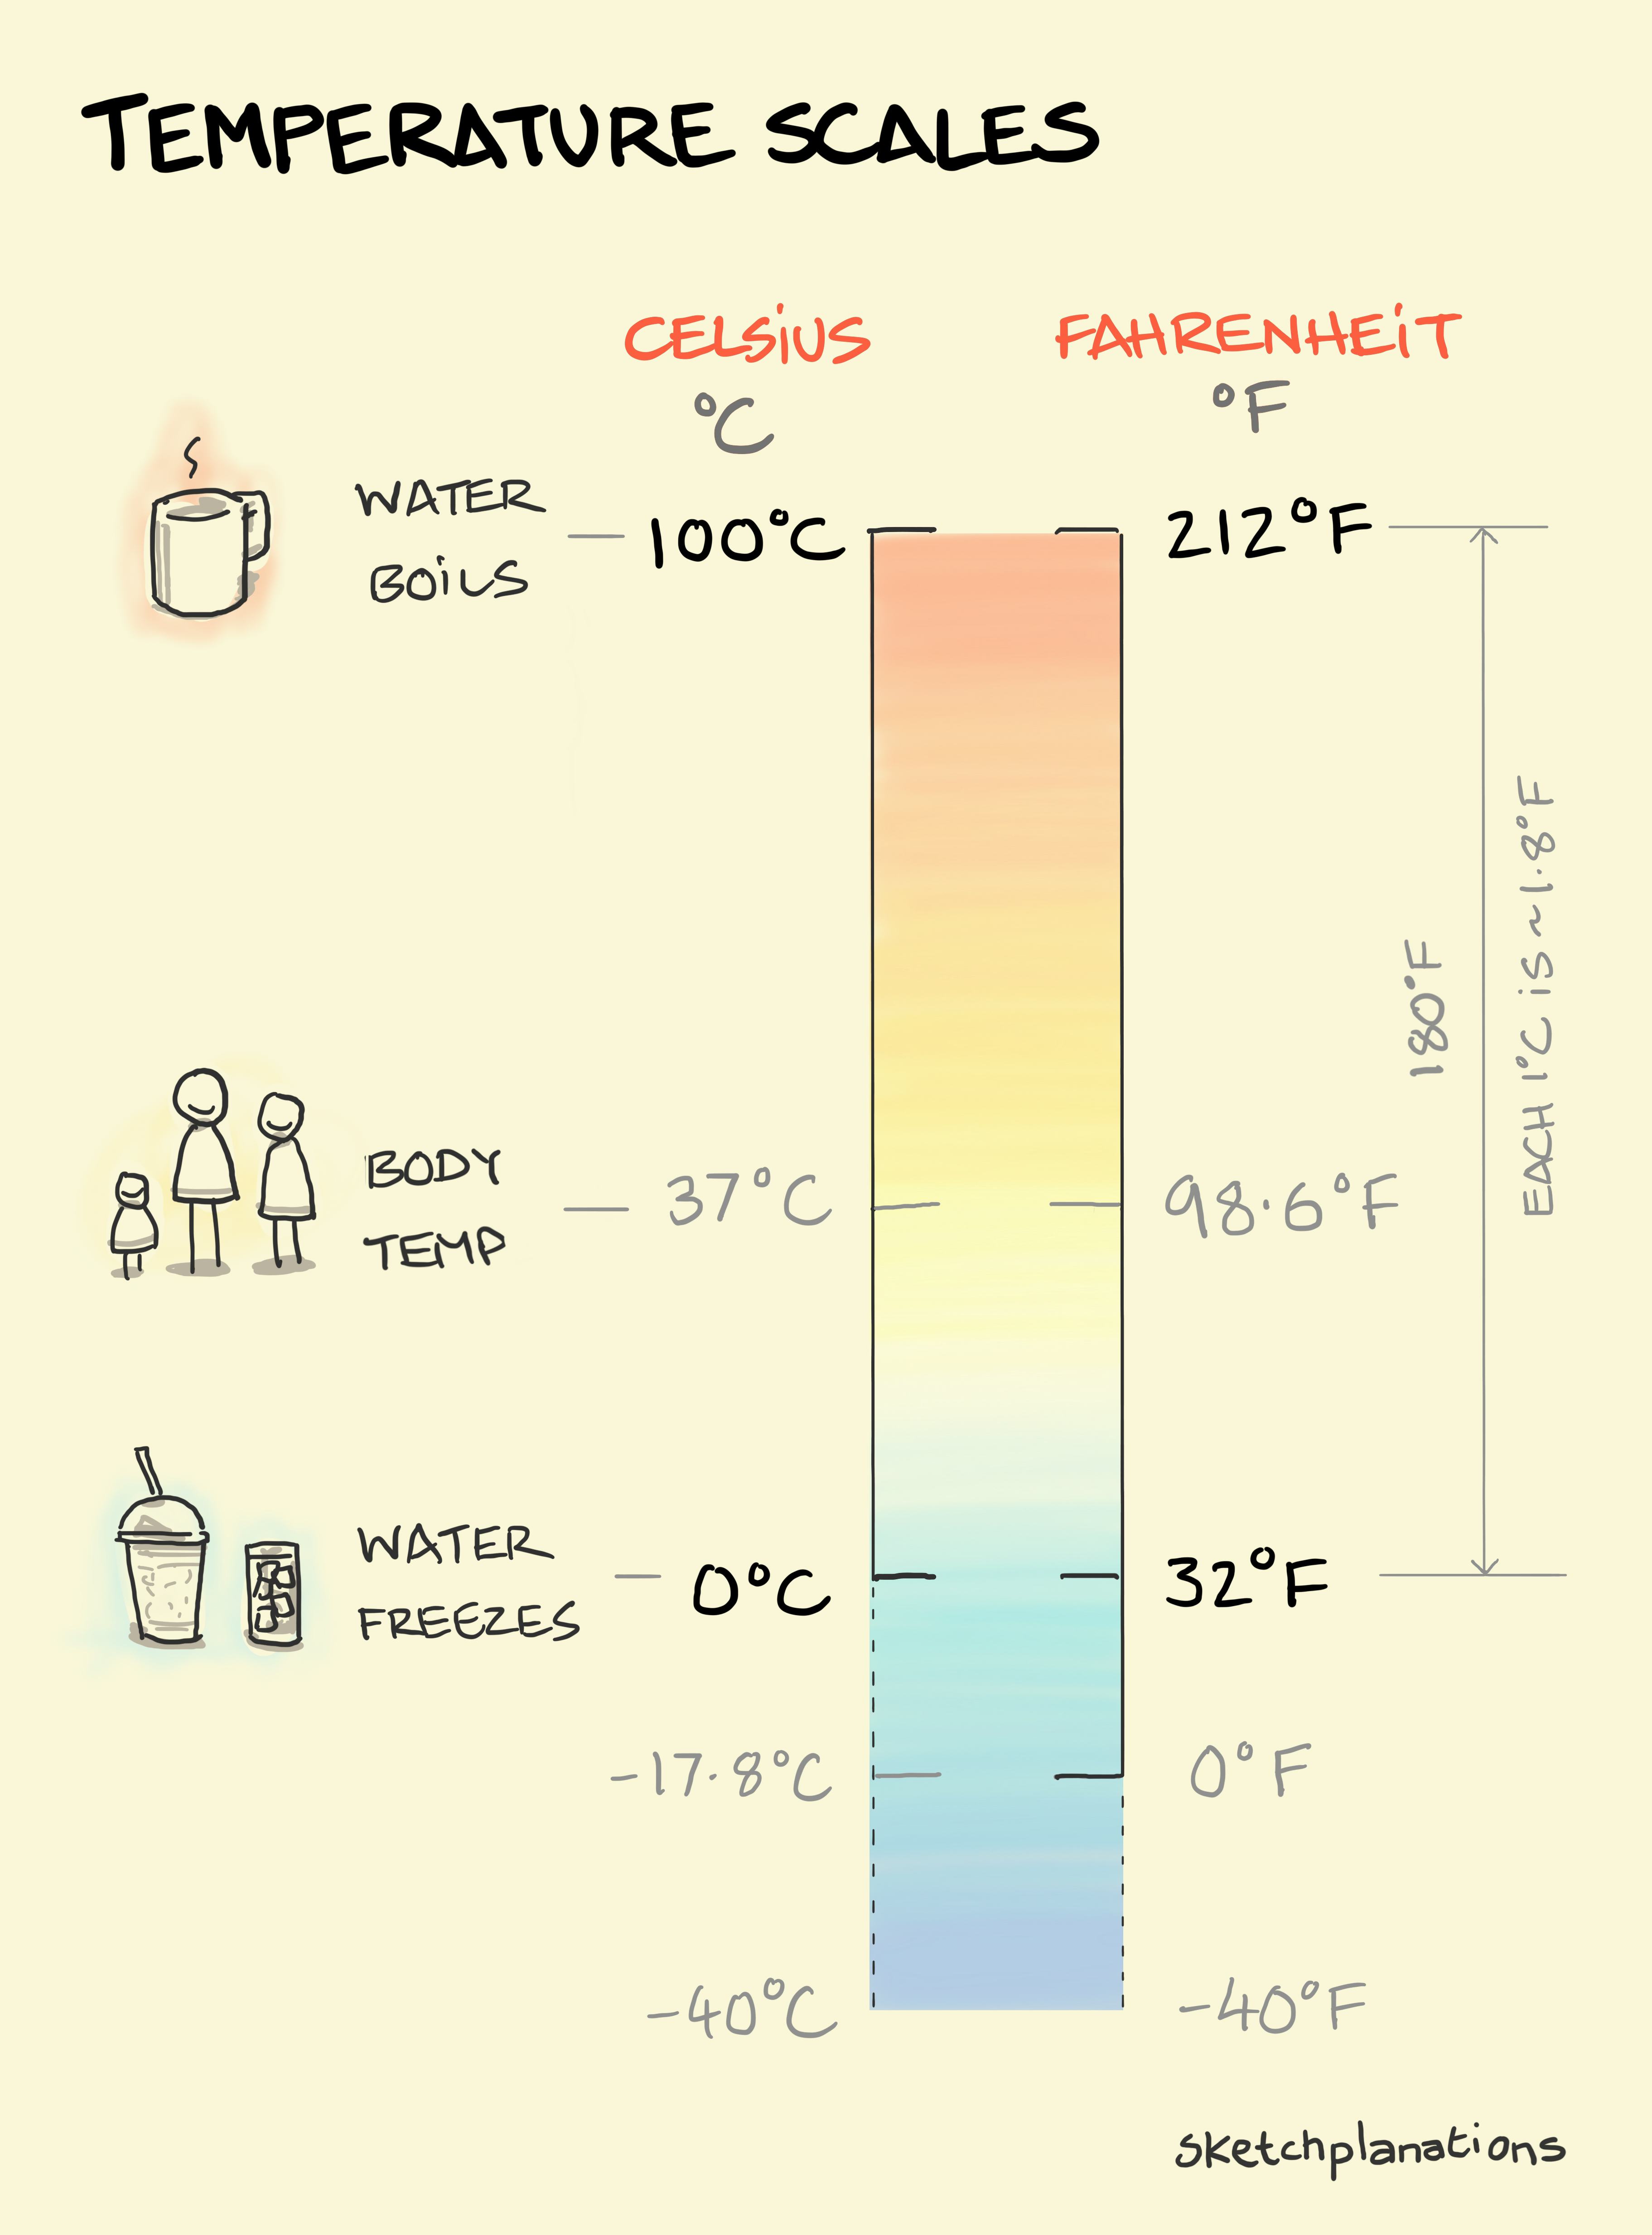 The two primary temperature scales of Celsius and Fahrenheit side-by-side calling out water freezing, body temperature and water boiling